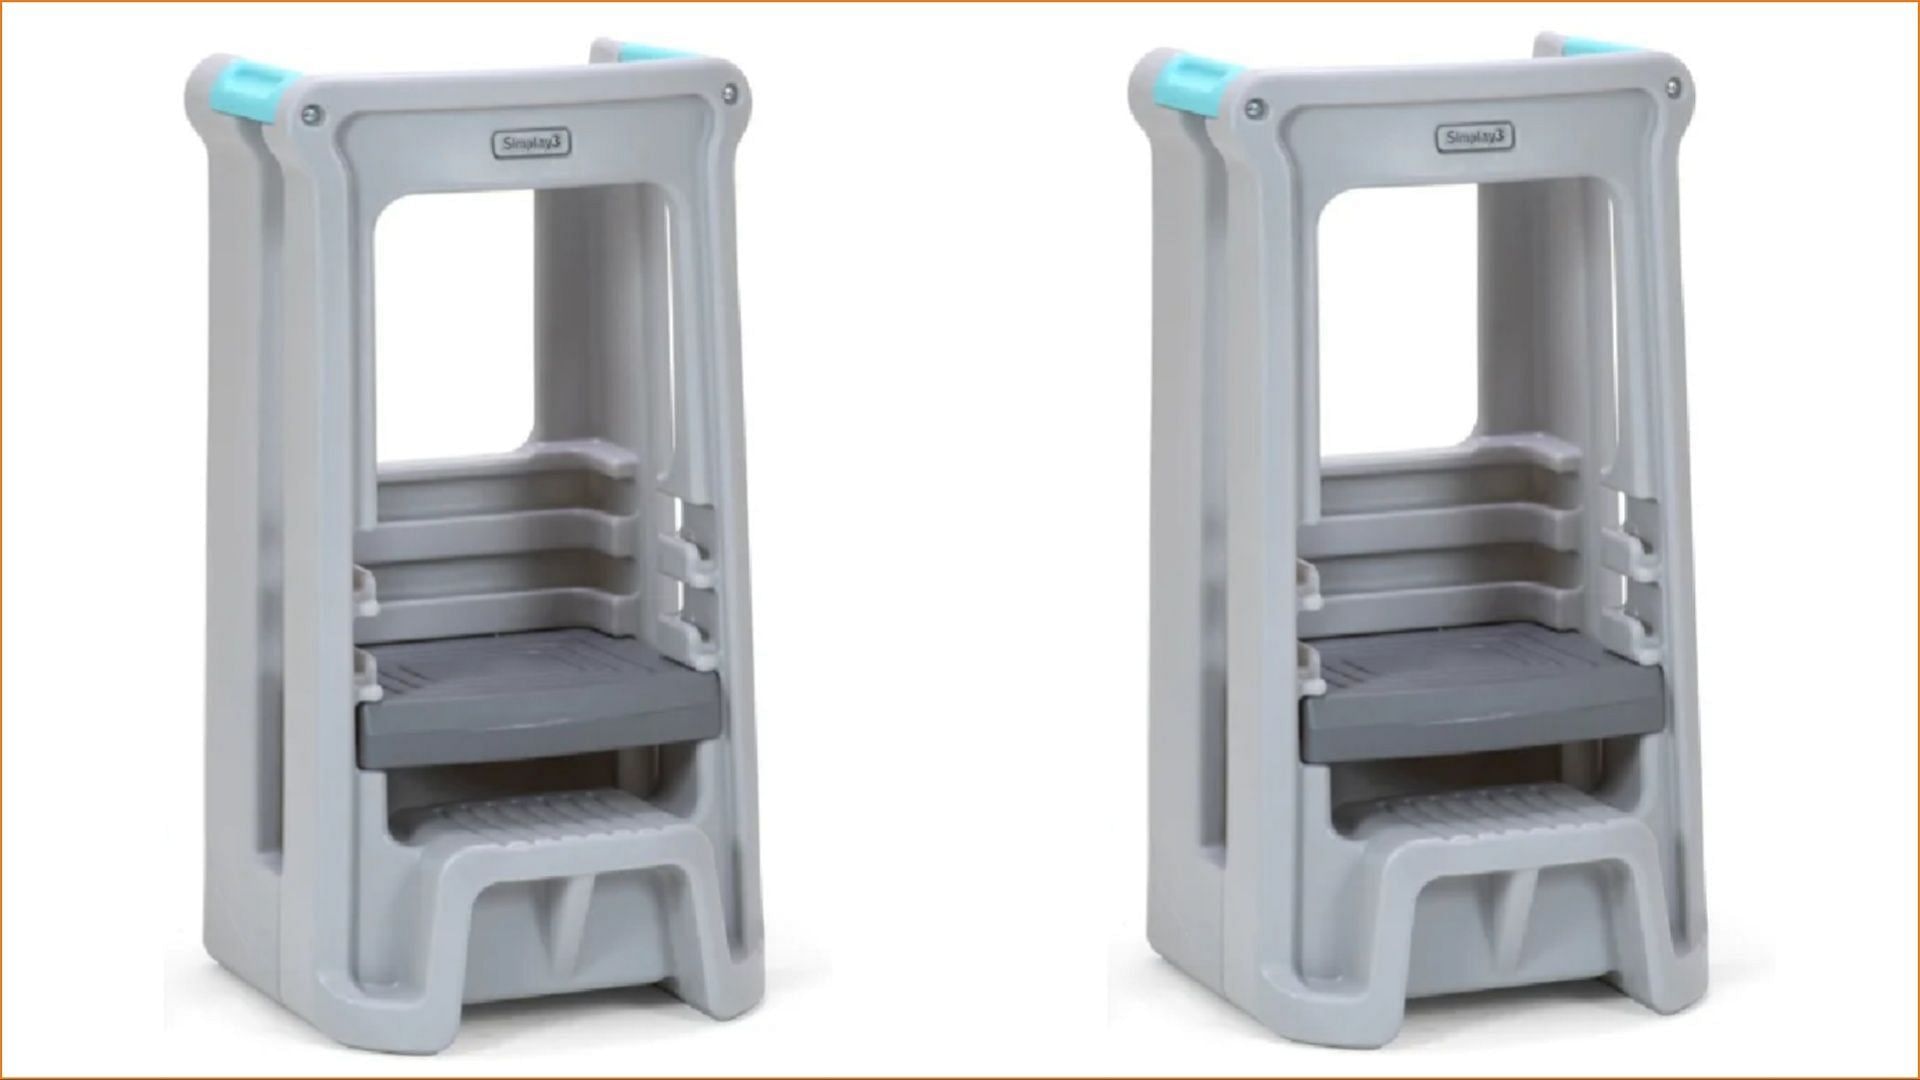 One of the recalled Simplay3 Toddler Towers in white posing risks of fall and injury (Image via CPSC / Health Canada)